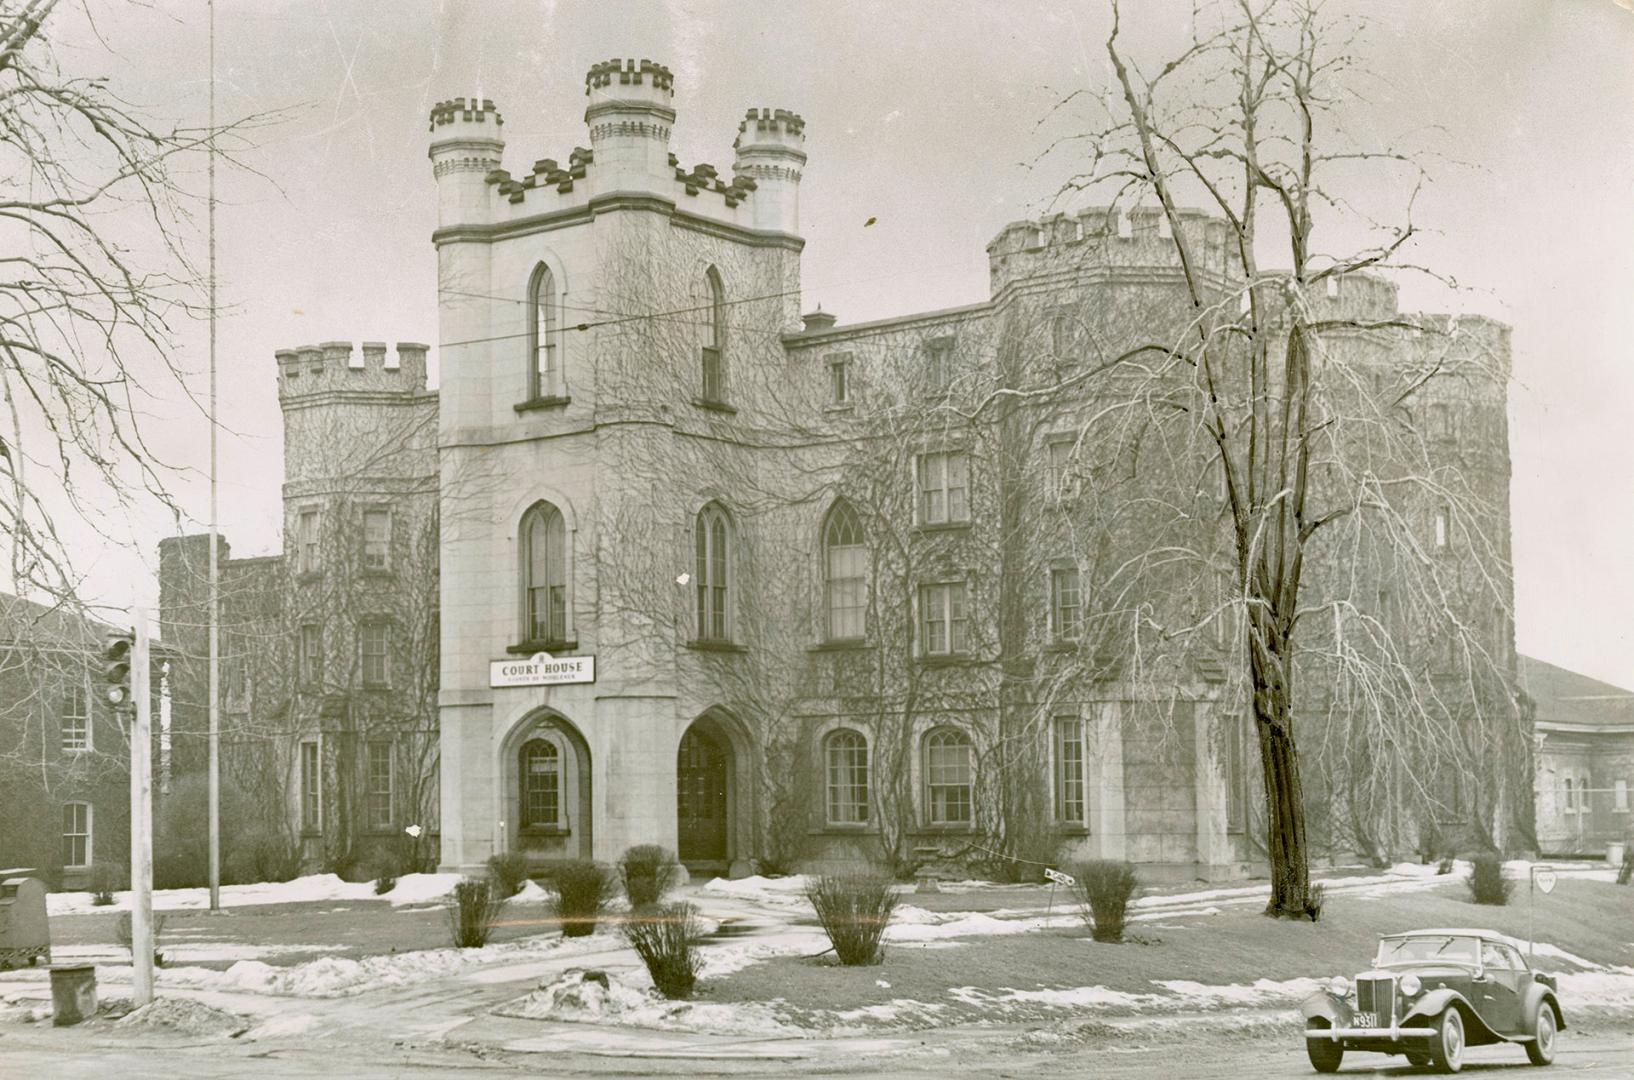 London court house where investigation of Mayor Allan Rush took place in London (Ont.)